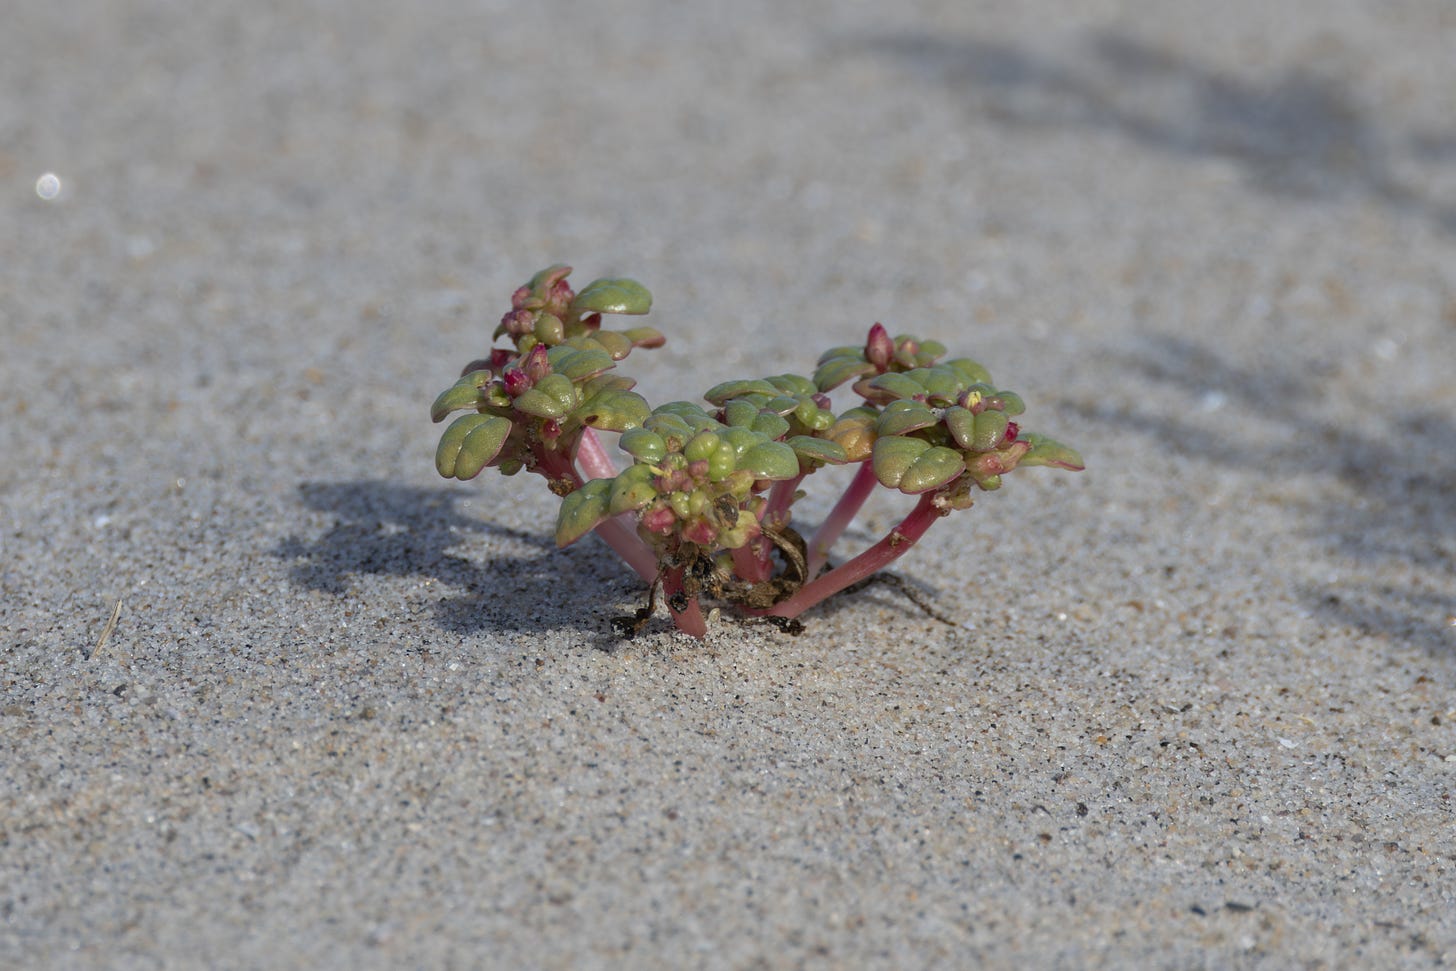 a small plant with a bunch of ~10 short stems sprouting from one spot in the sand, each stem leading to a small, oval, pale-green leaf, edged with pink, with deep veins.